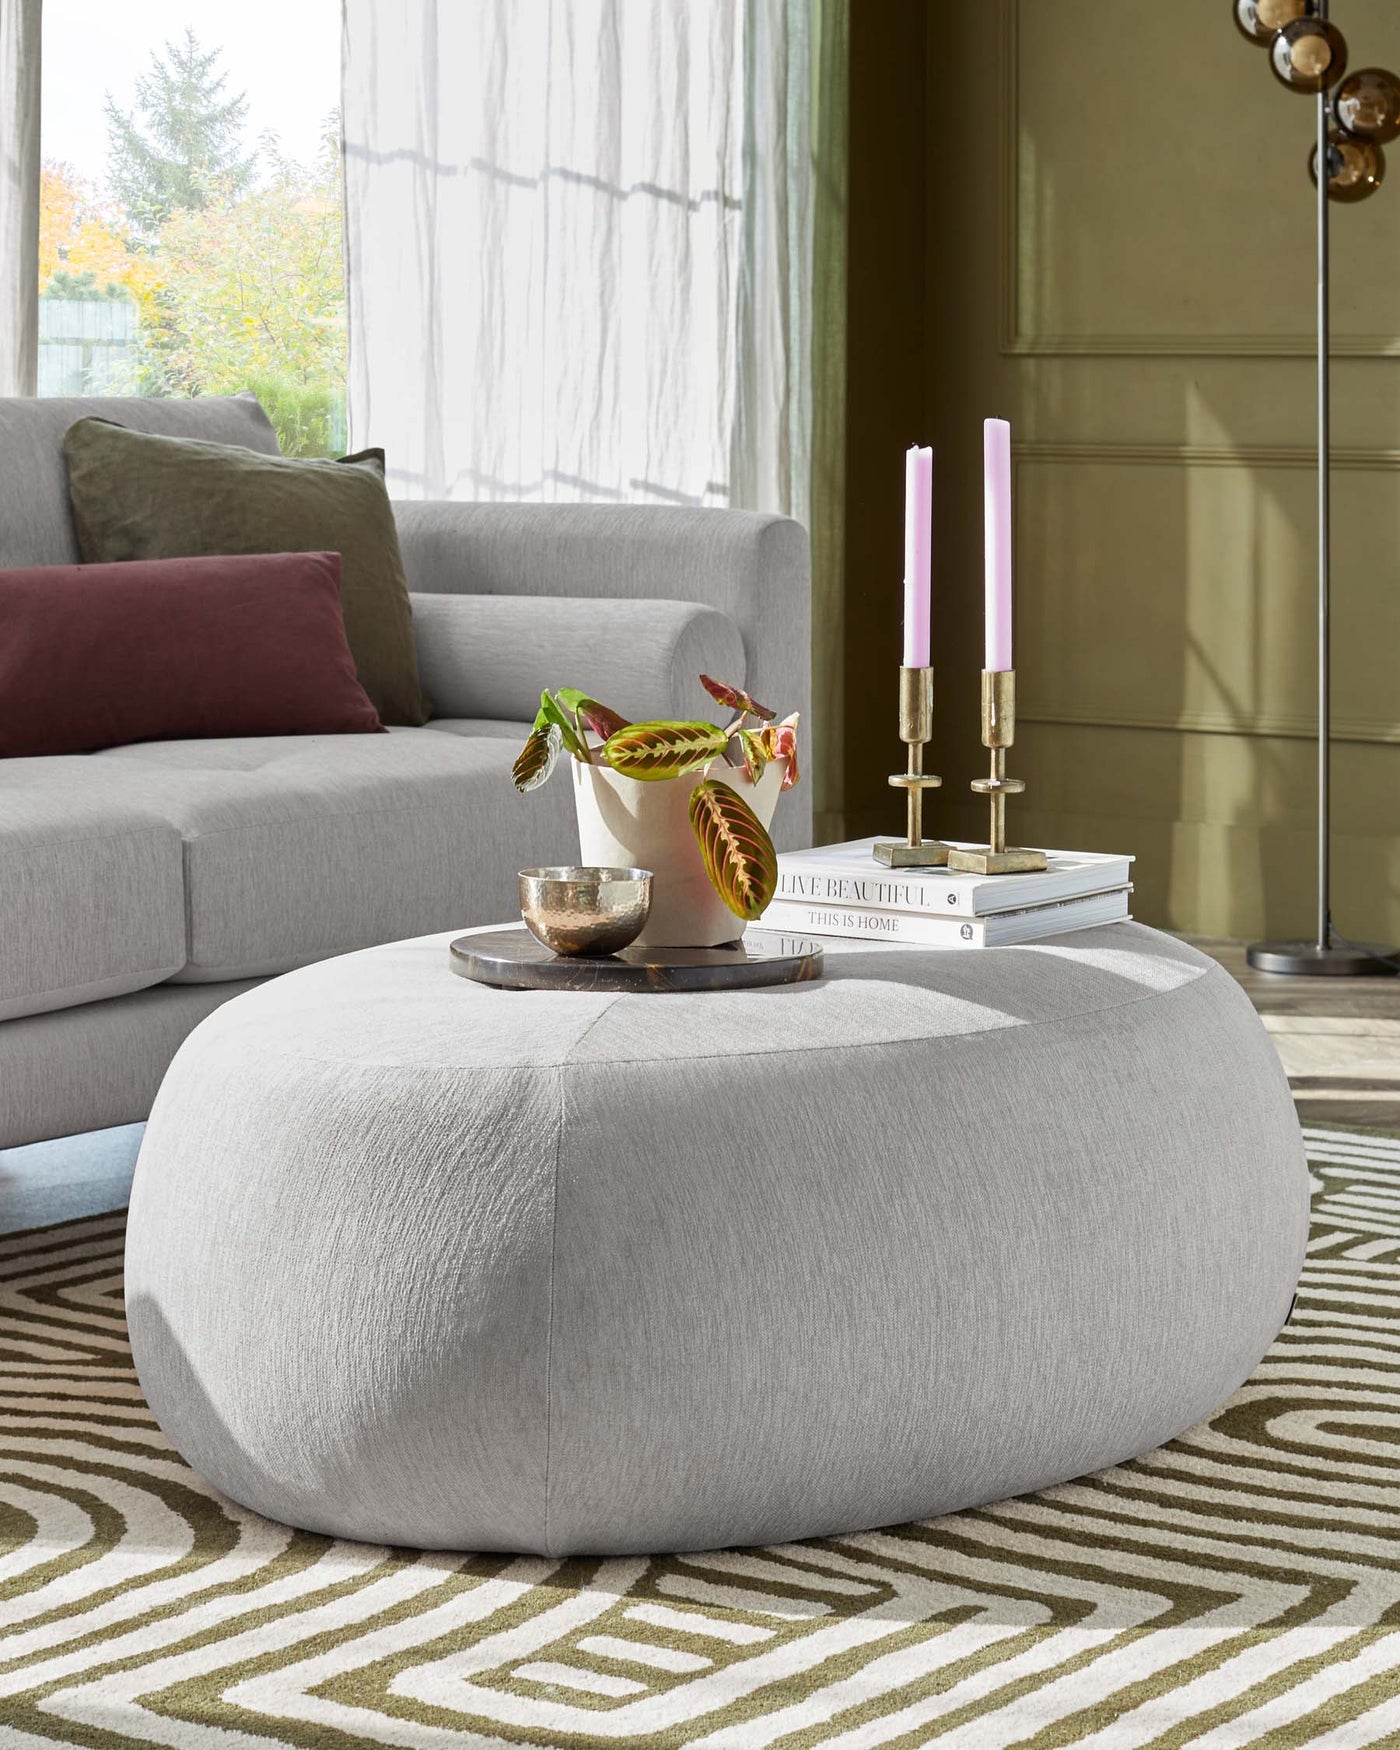 Contemporary living room with a light grey upholstered round ottoman at the centre. The ottoman is complemented by a grey fabric sofa adorned with neutral-toned cushions, resting against a window with sheer curtains. A geometric pattern rug in cream and olive tones underlies the furniture setup. Decorative elements include a plant, candles, and books atop the ottoman.